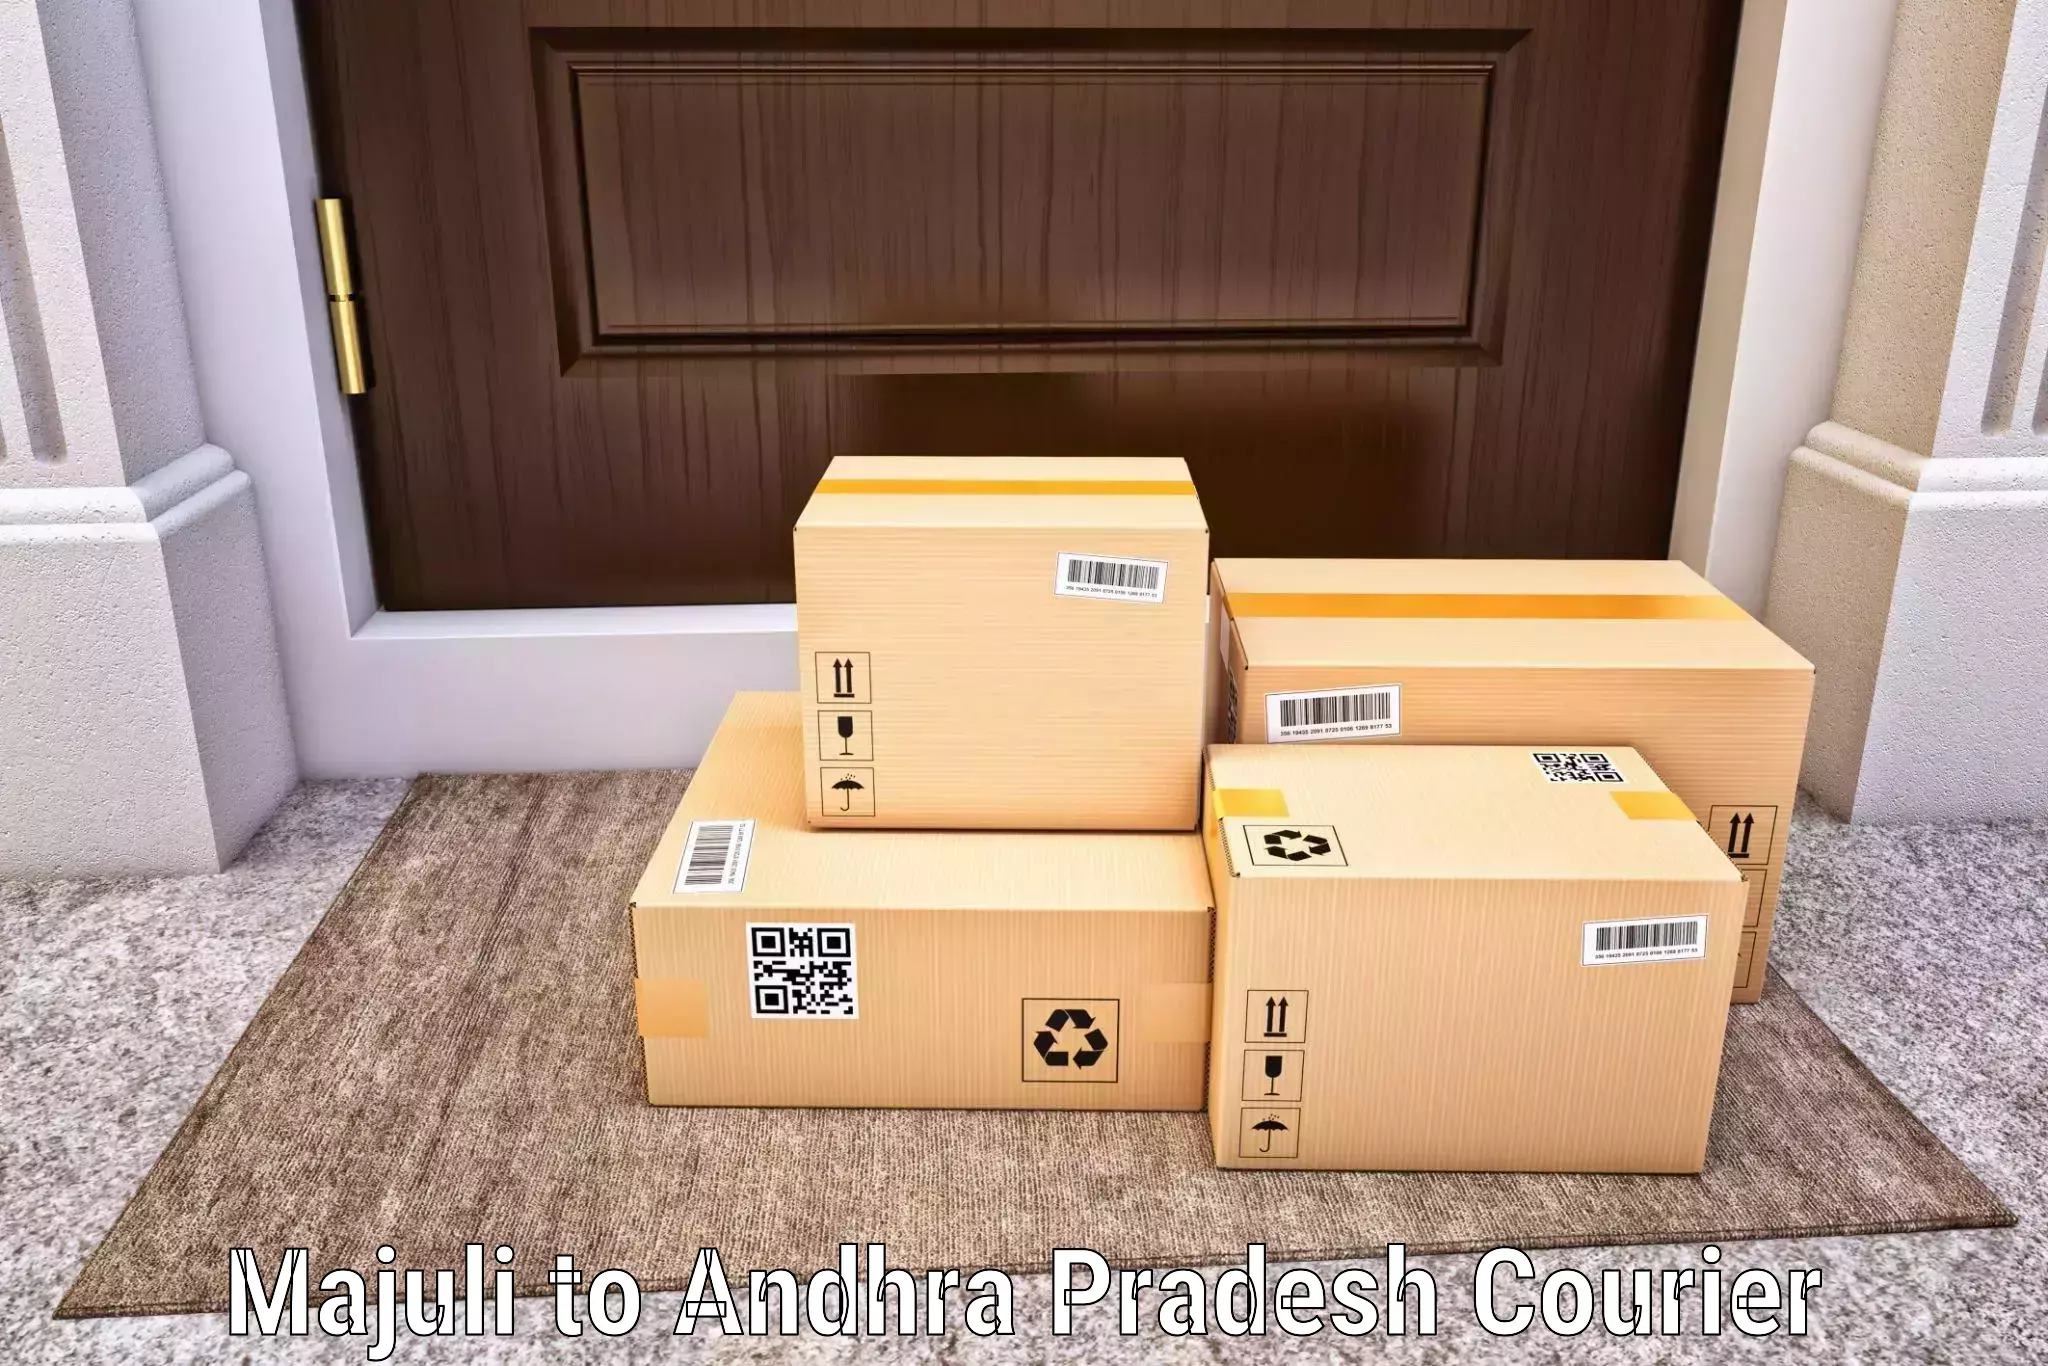 Local courier options in Majuli to Visakhapatnam Port